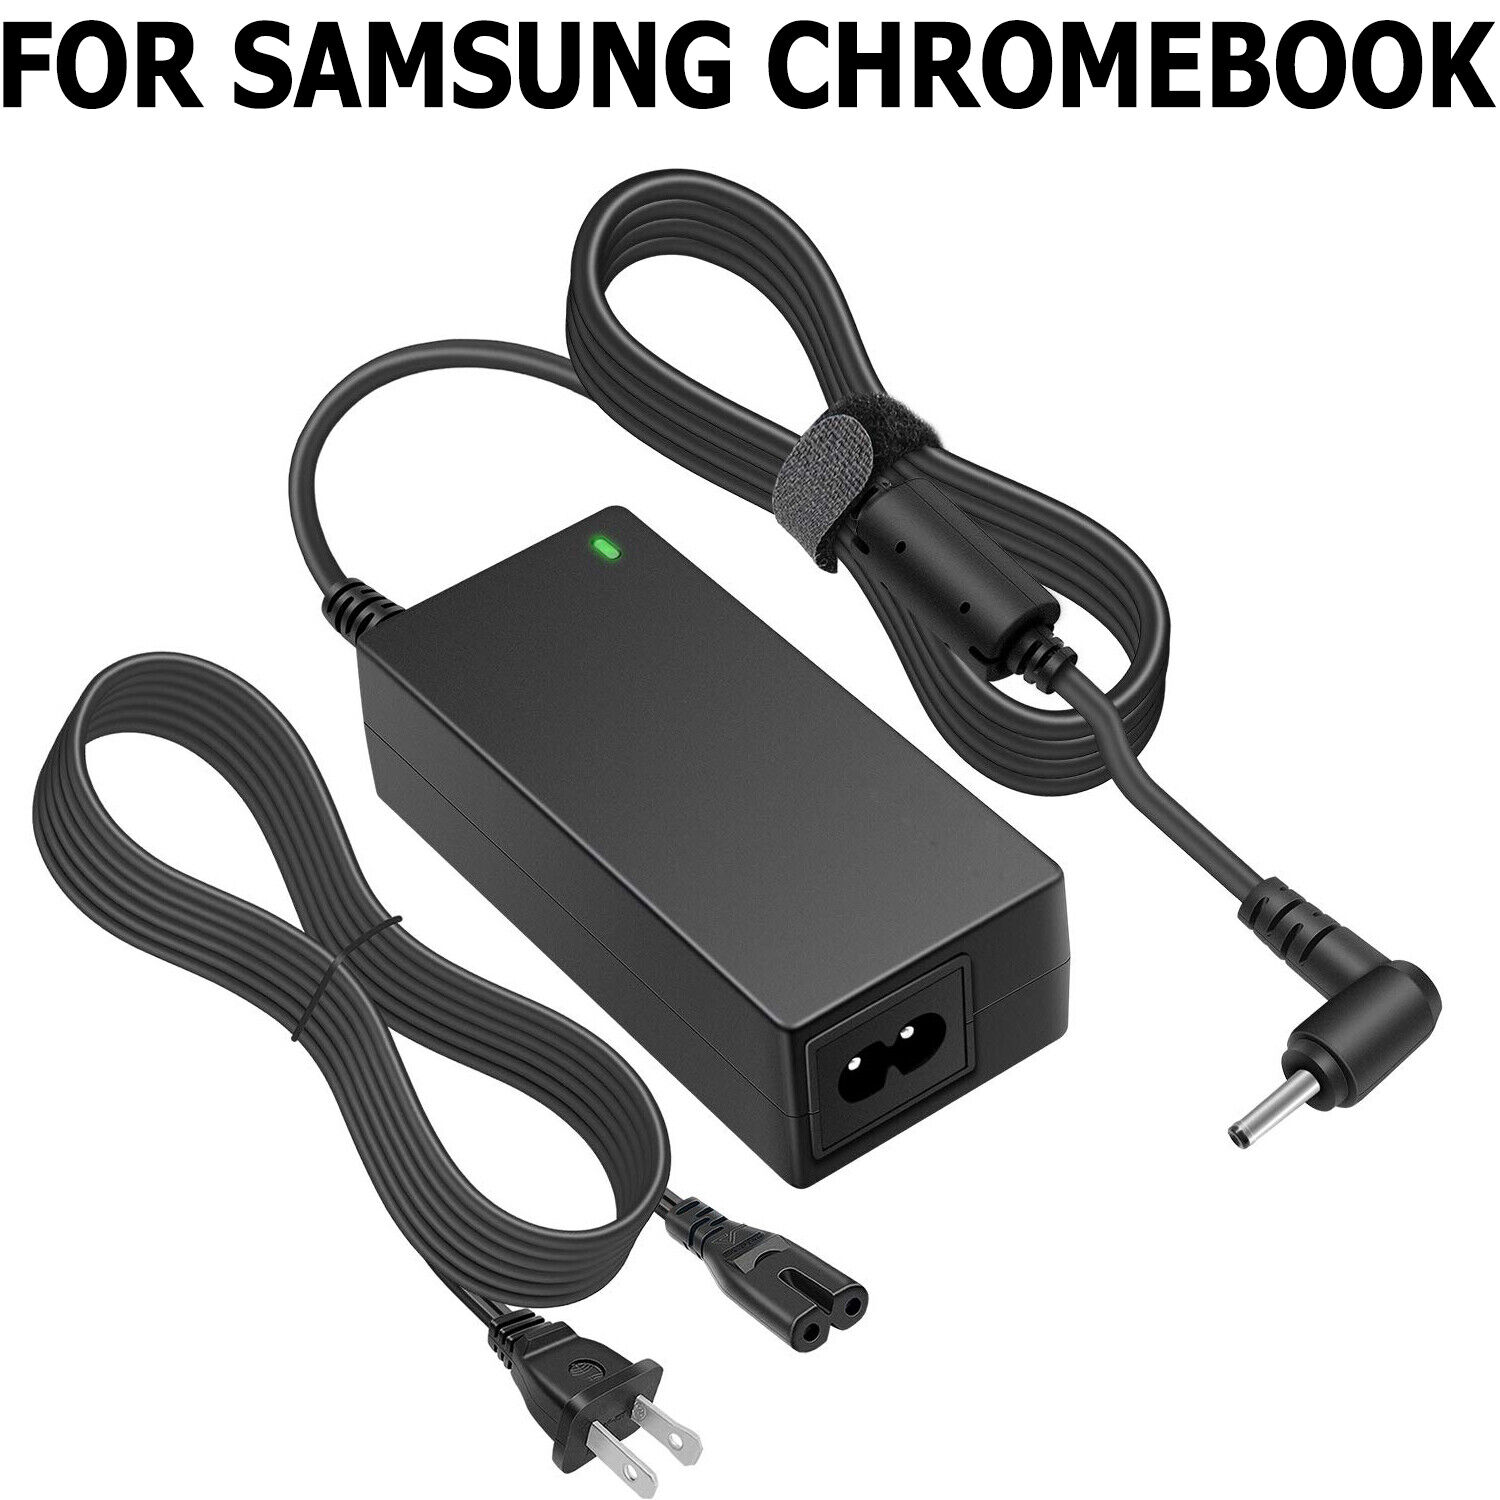 For Samsung Chromebook XE500C13-K05US XE500C13-K04US AC Power Adapter Charger